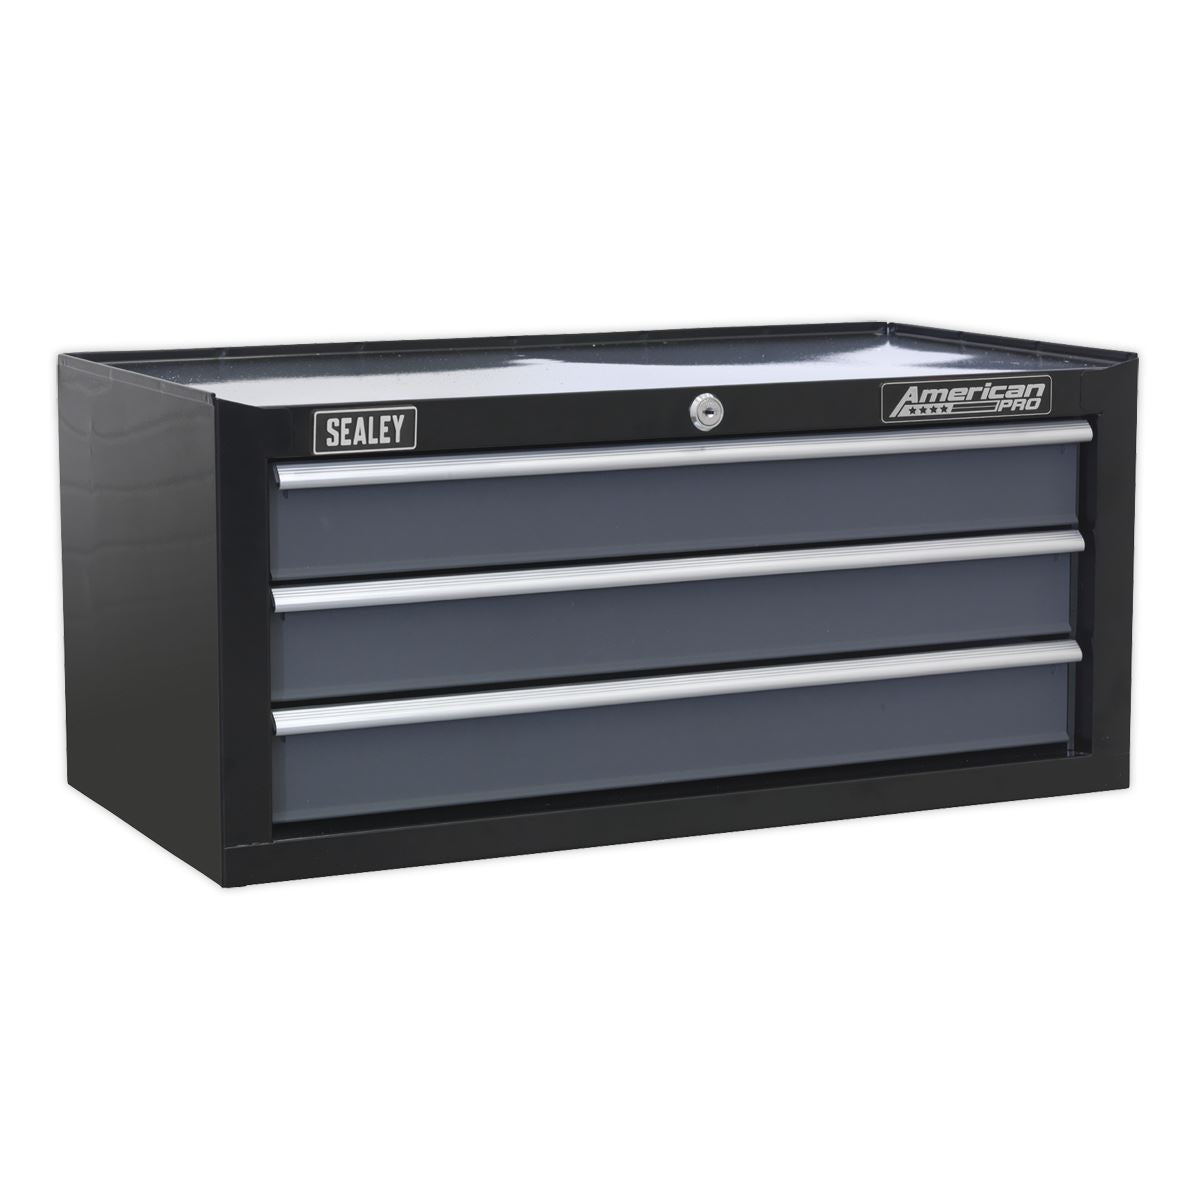 Sealey American Pro Mid-Box Tool Chest 3 Drawer with Ball-Bearing Slides - Black/Grey